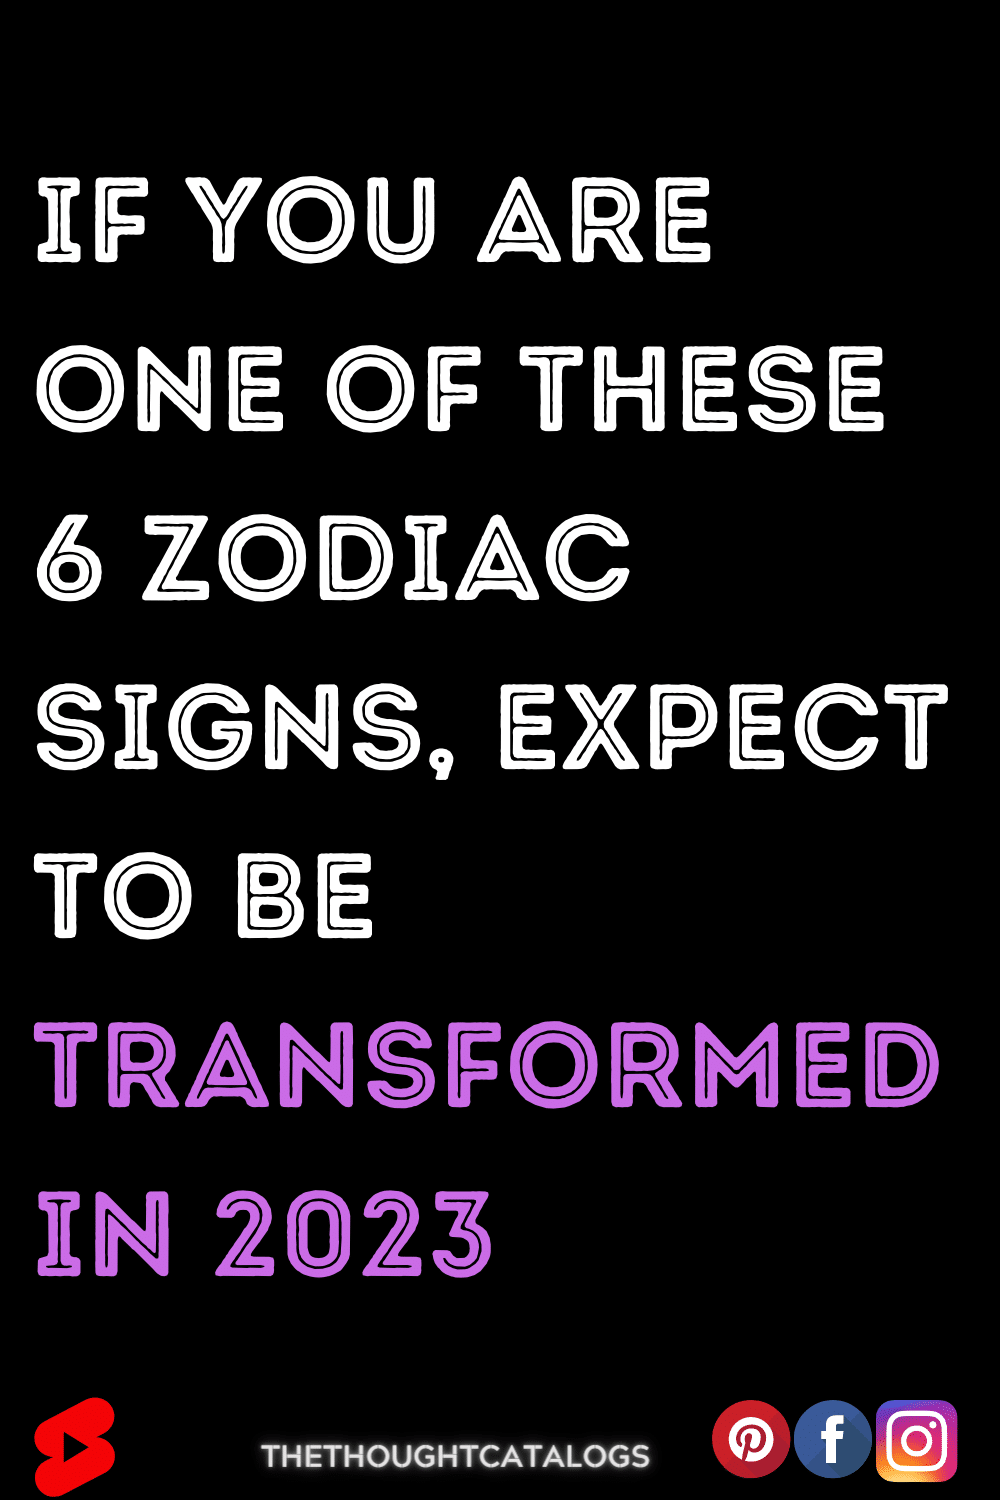 If You Are One Of These 6 Zodiac Signs, Expect To Be Transformed In 2023